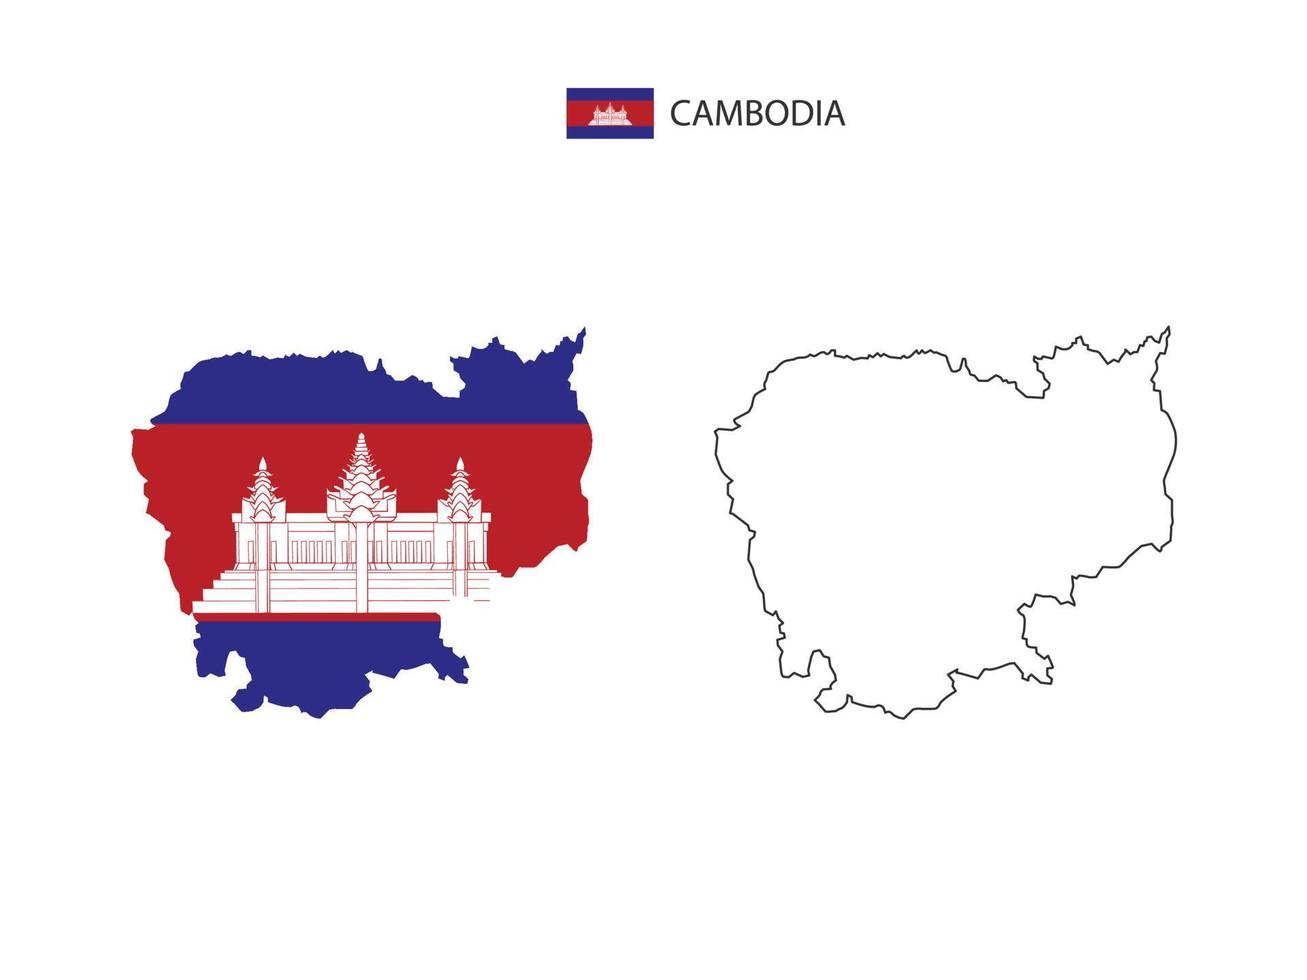 Cambodia map city vector divided by outline simplicity style. Have 2 versions, black thin line version and color of country flag version. Both map were on the white background.